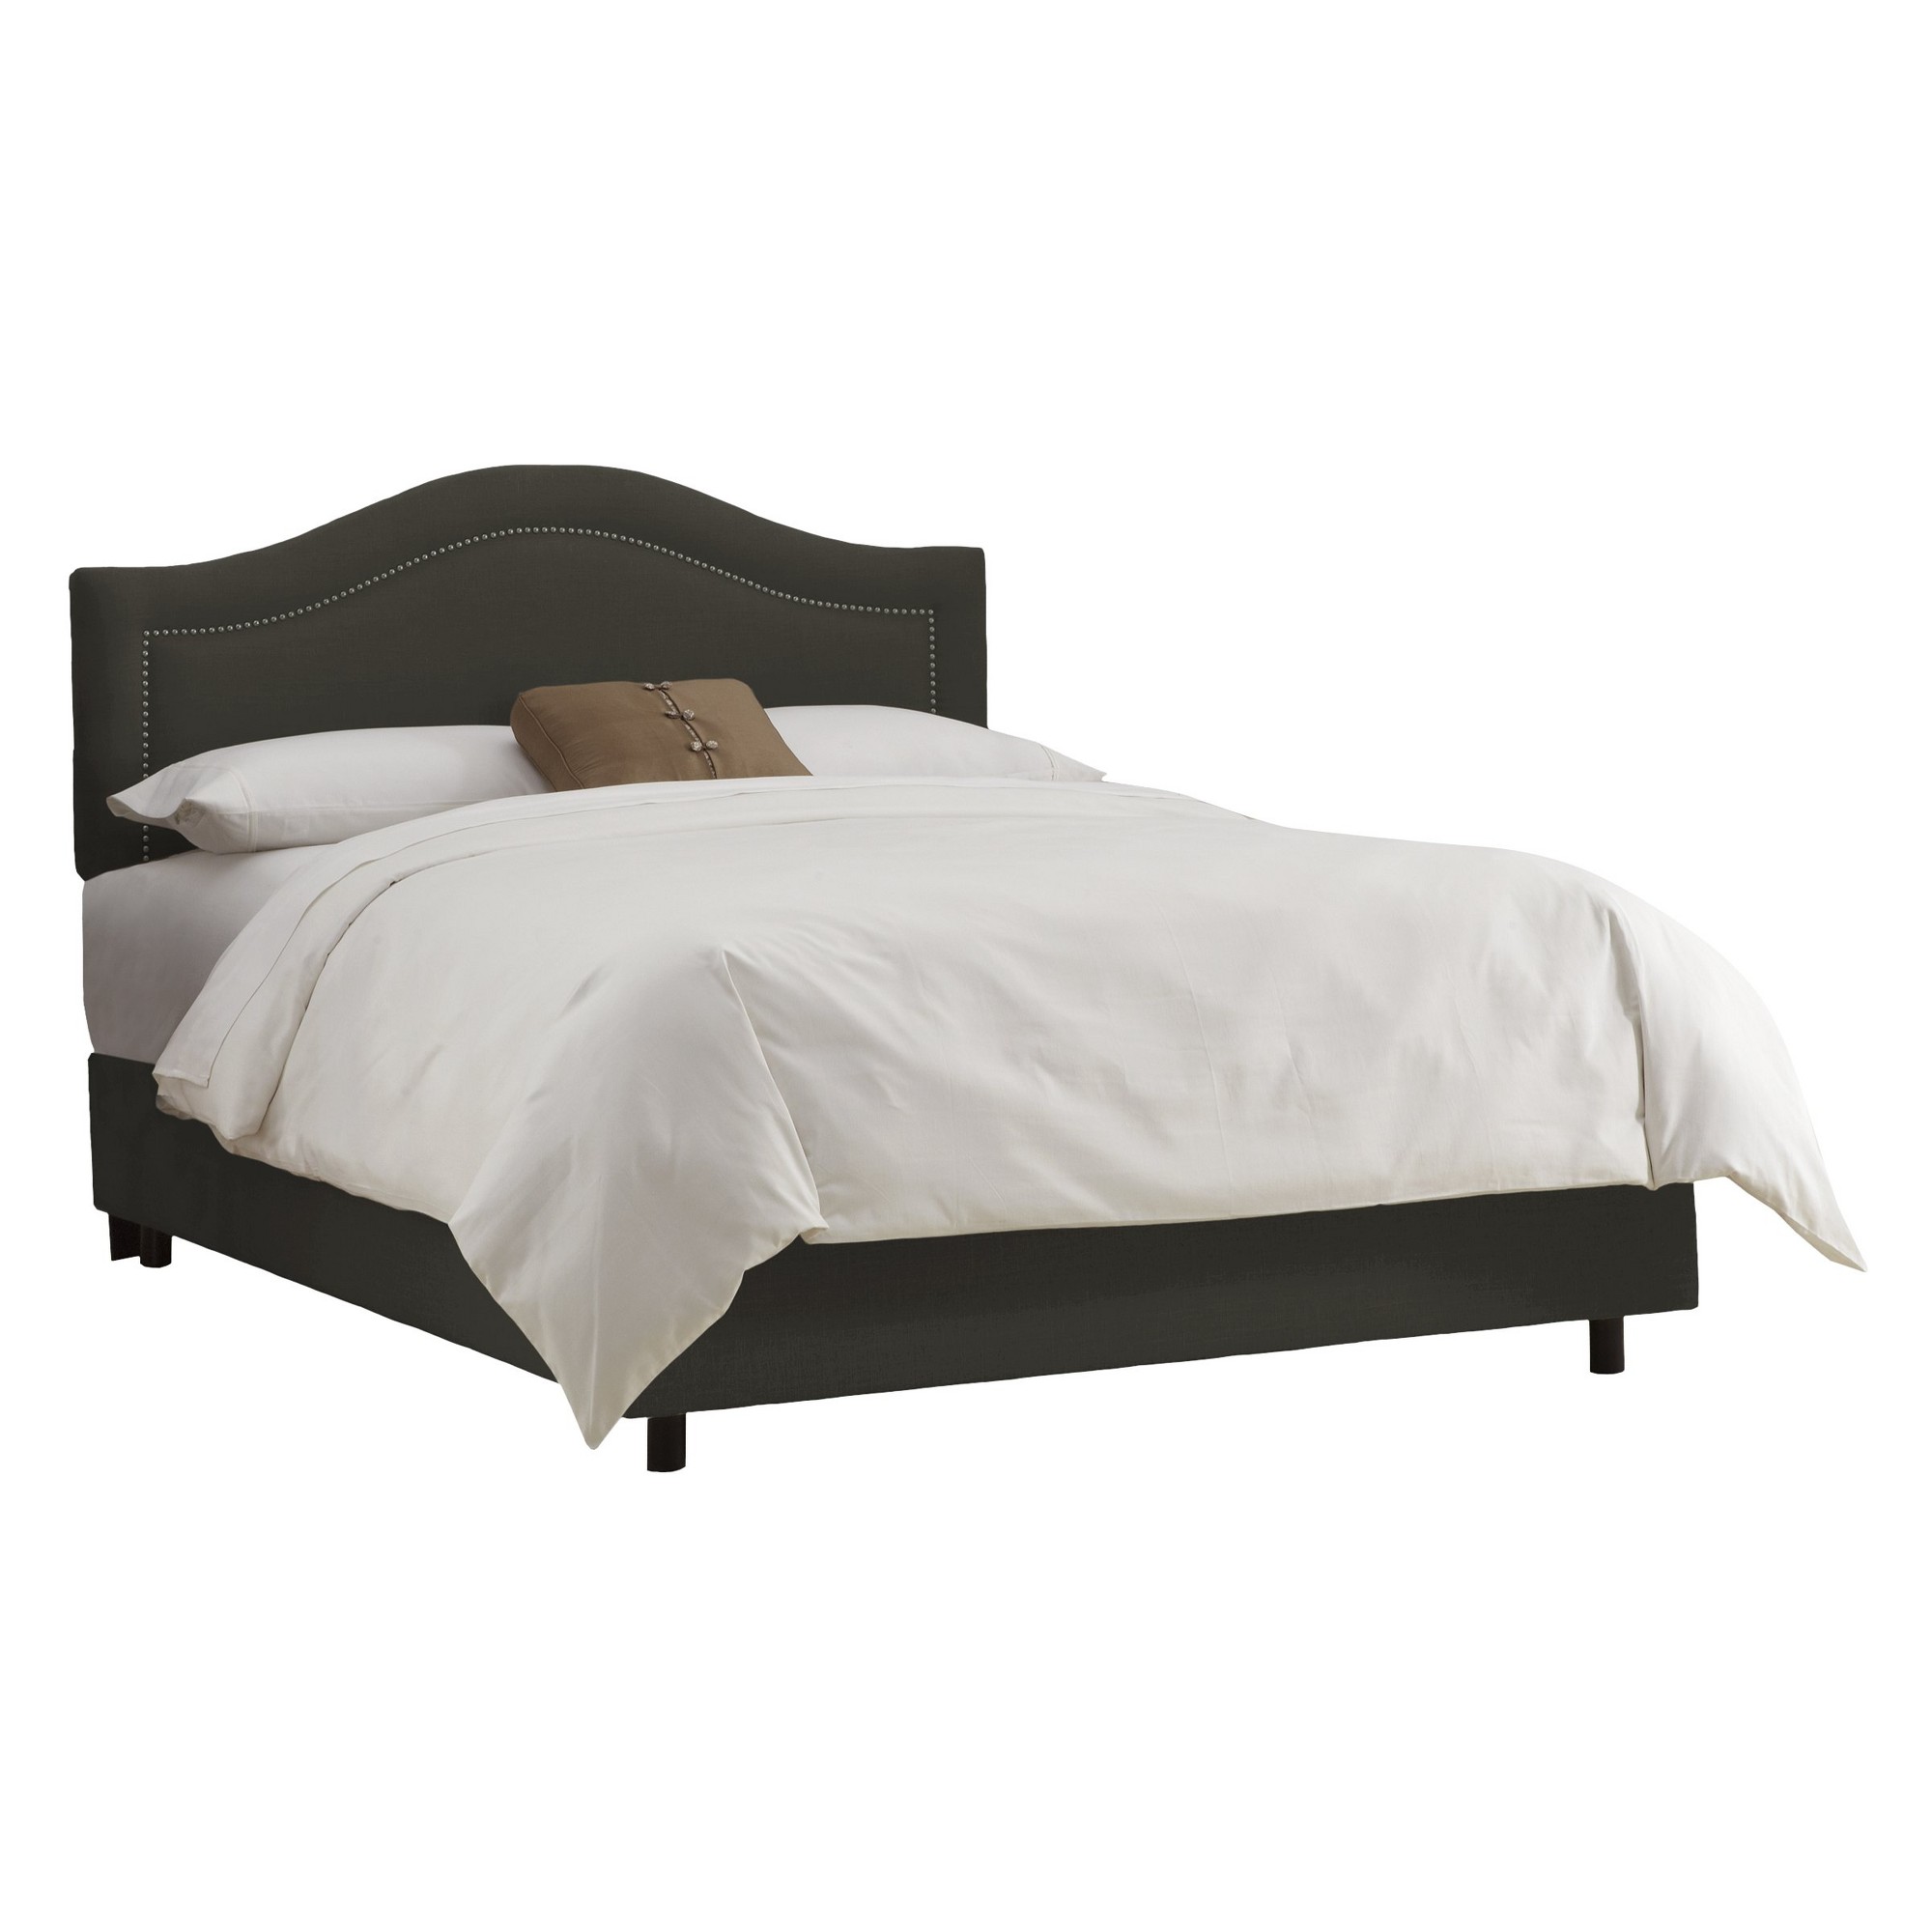 Skyline Furniture Merion Inset Nailbutton Bed - Charcoal (Cal King) - Skyline Furniture , Size: California King, Grey